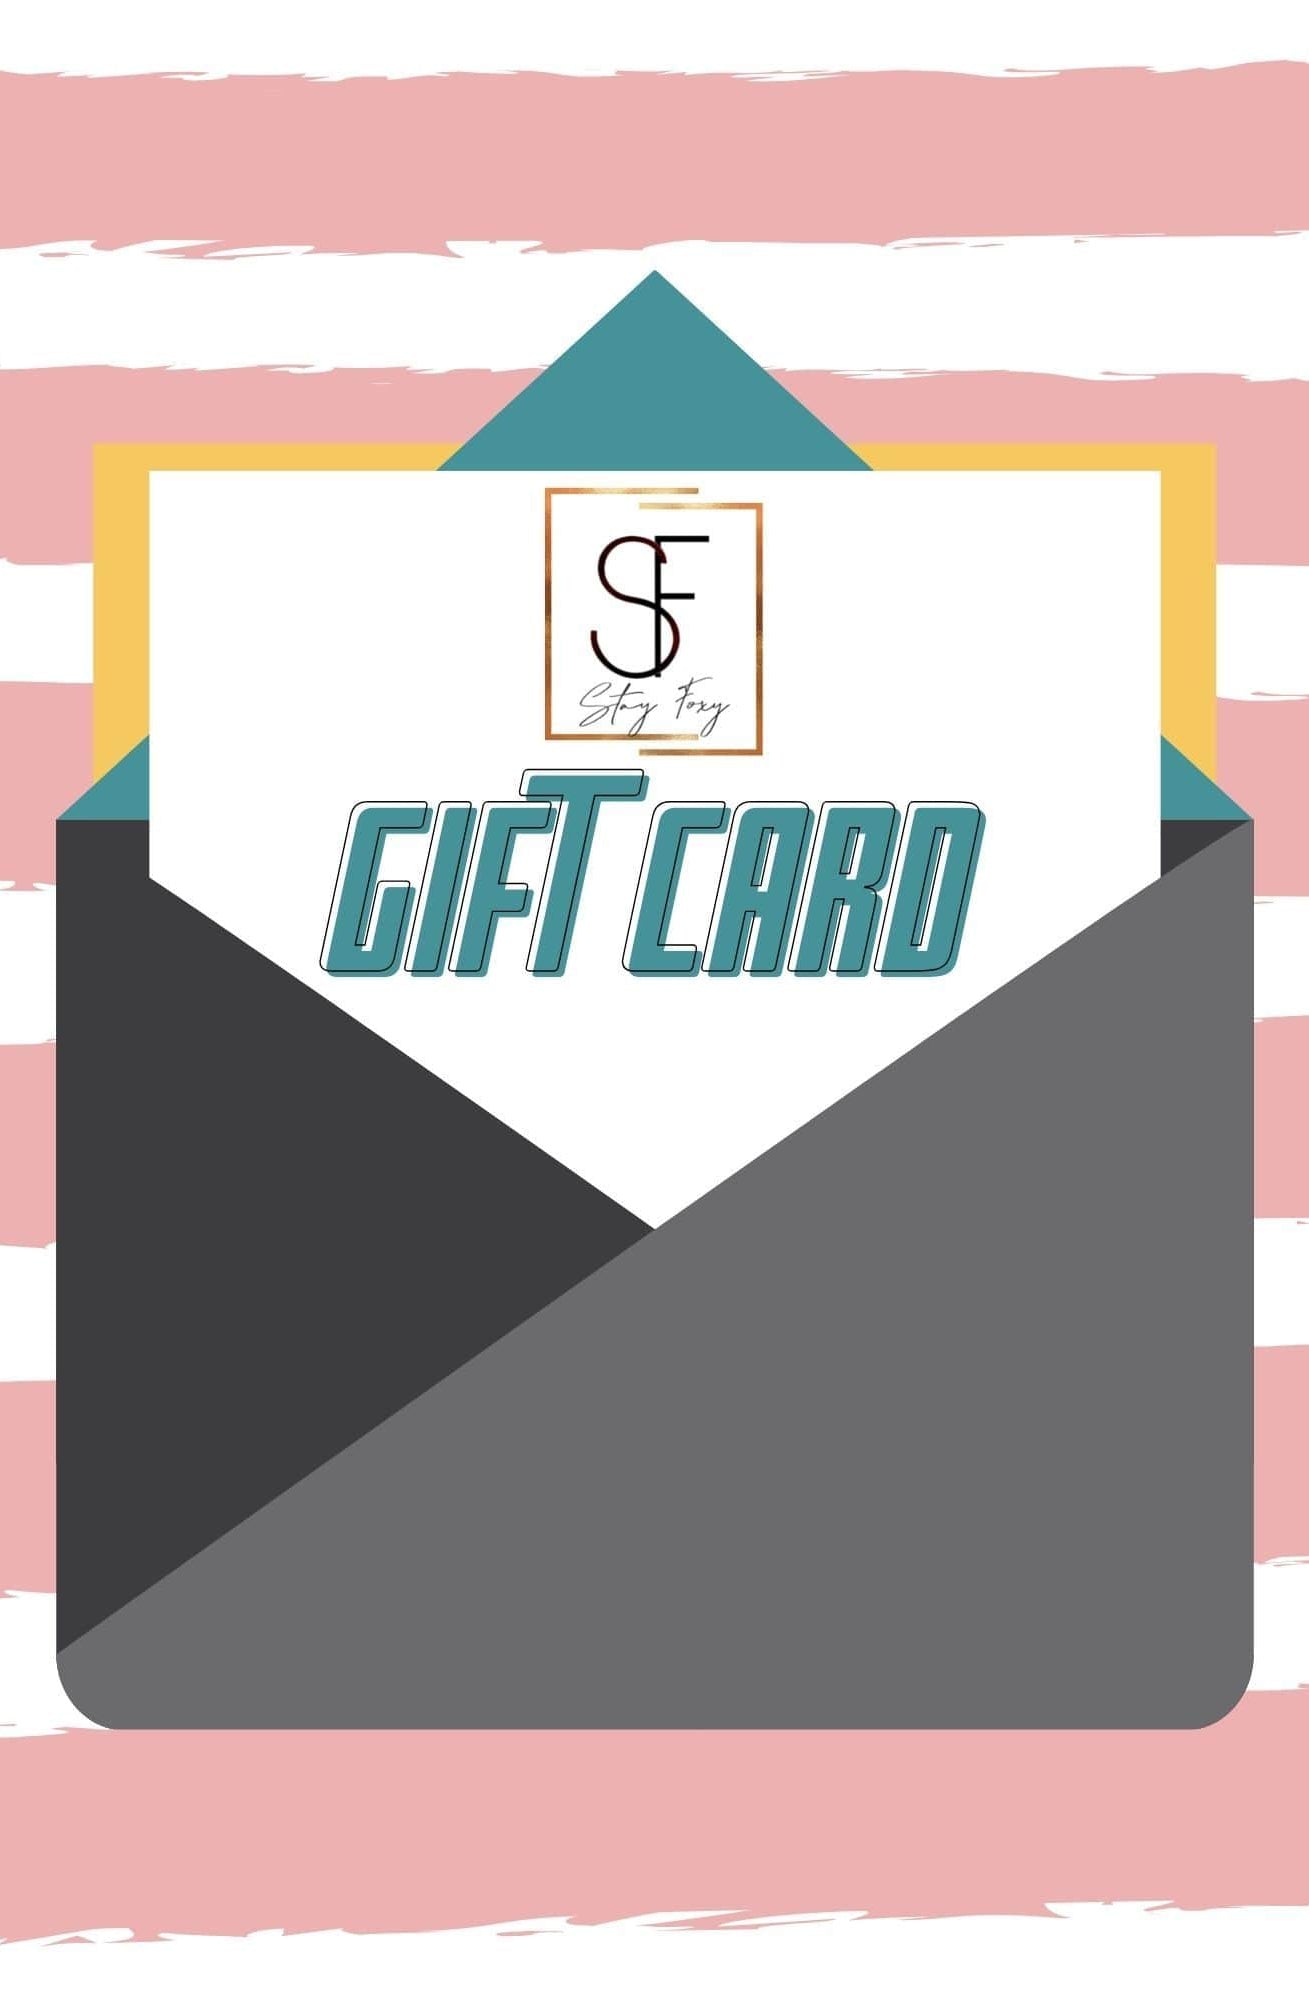 Stay Foxy Boutique Gift Certificate-Gift Cards-Stay Foxy Boutique, Florissant, Missouri